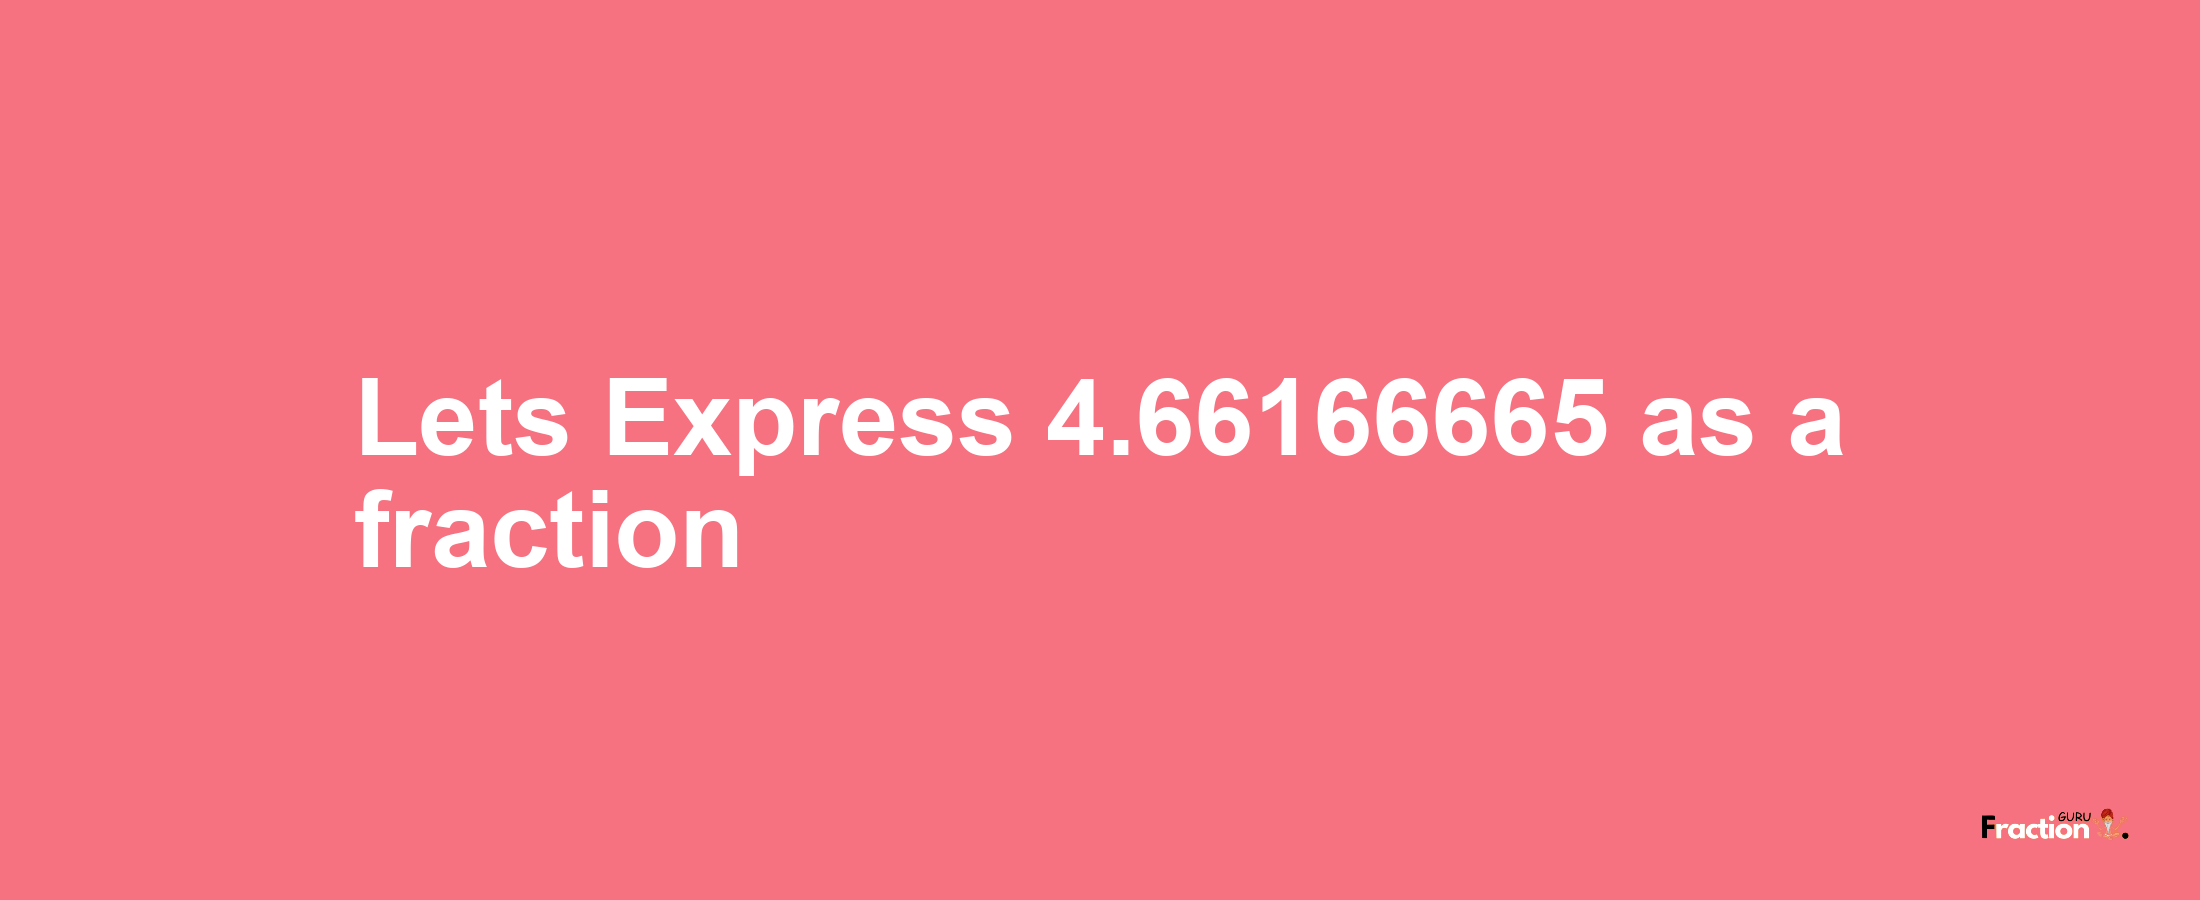 Lets Express 4.66166665 as afraction